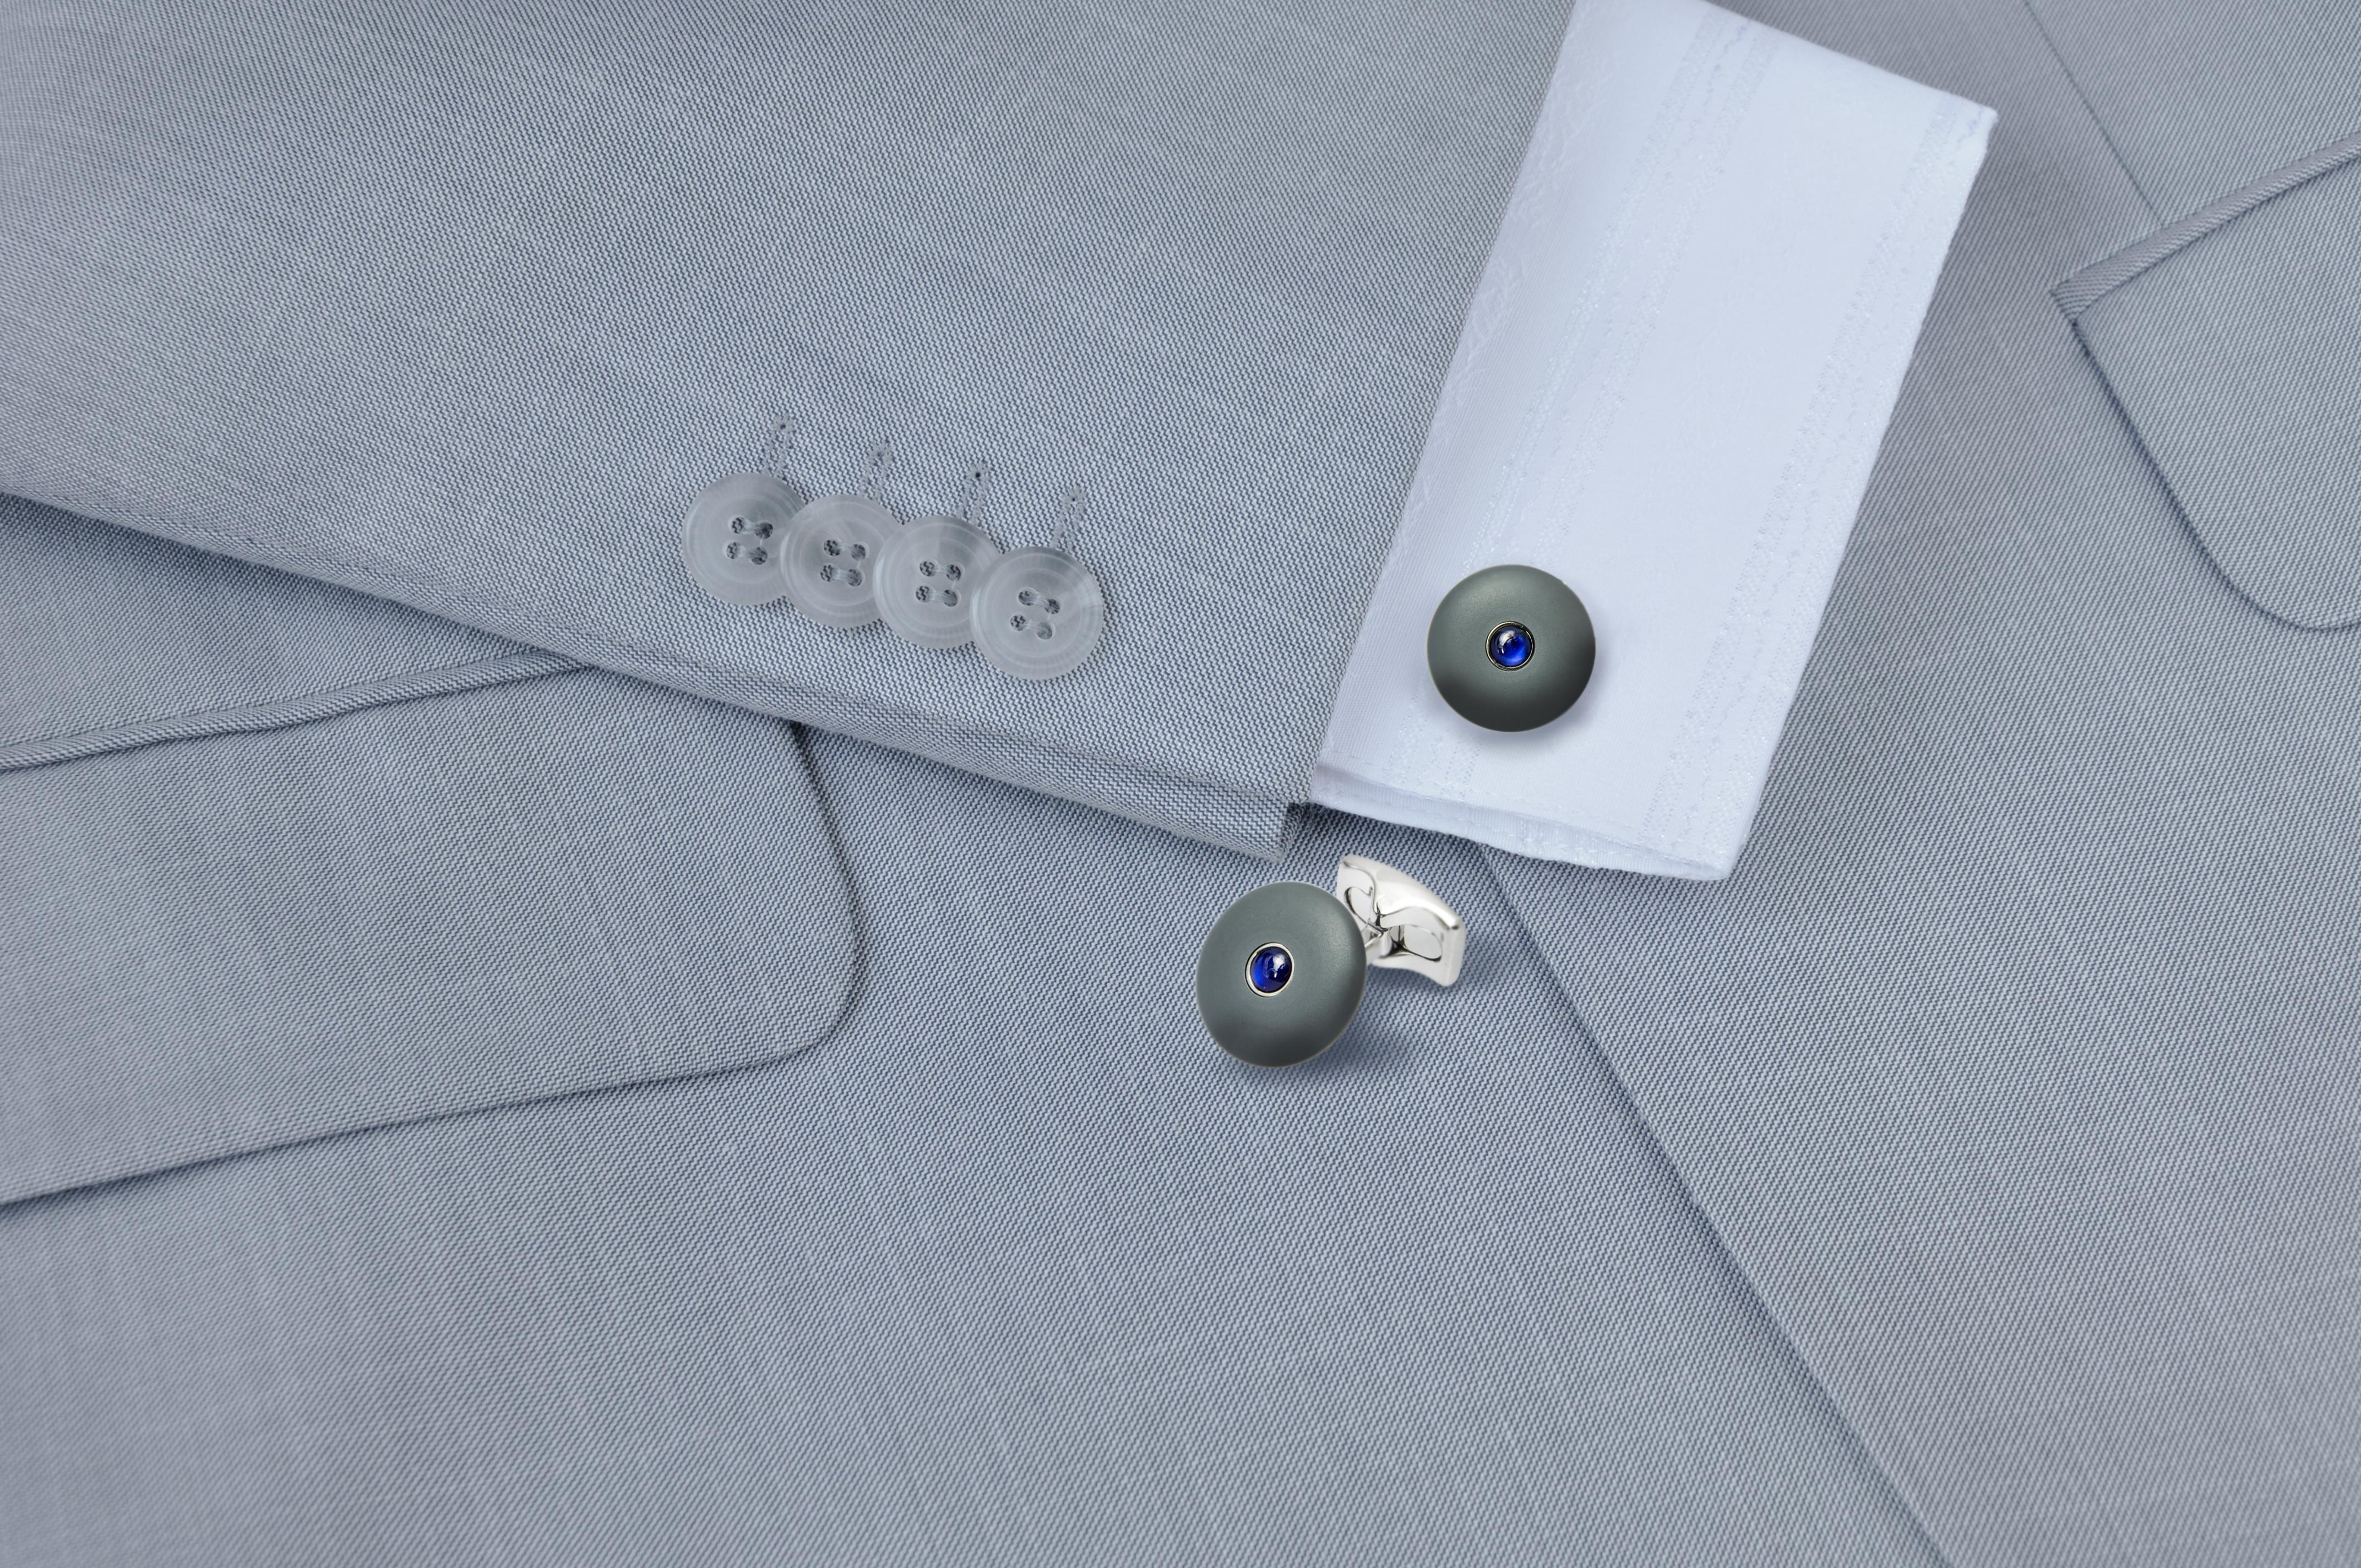 DEAKIN & FRANCIS, Piccadilly Arcade, London

Simple yet stunning, these round cufflinks have been crafted from cold cure enamel in a smooth grey finish and centred with a sparkling blue cultured cabochon sapphire centre. The most understated colour